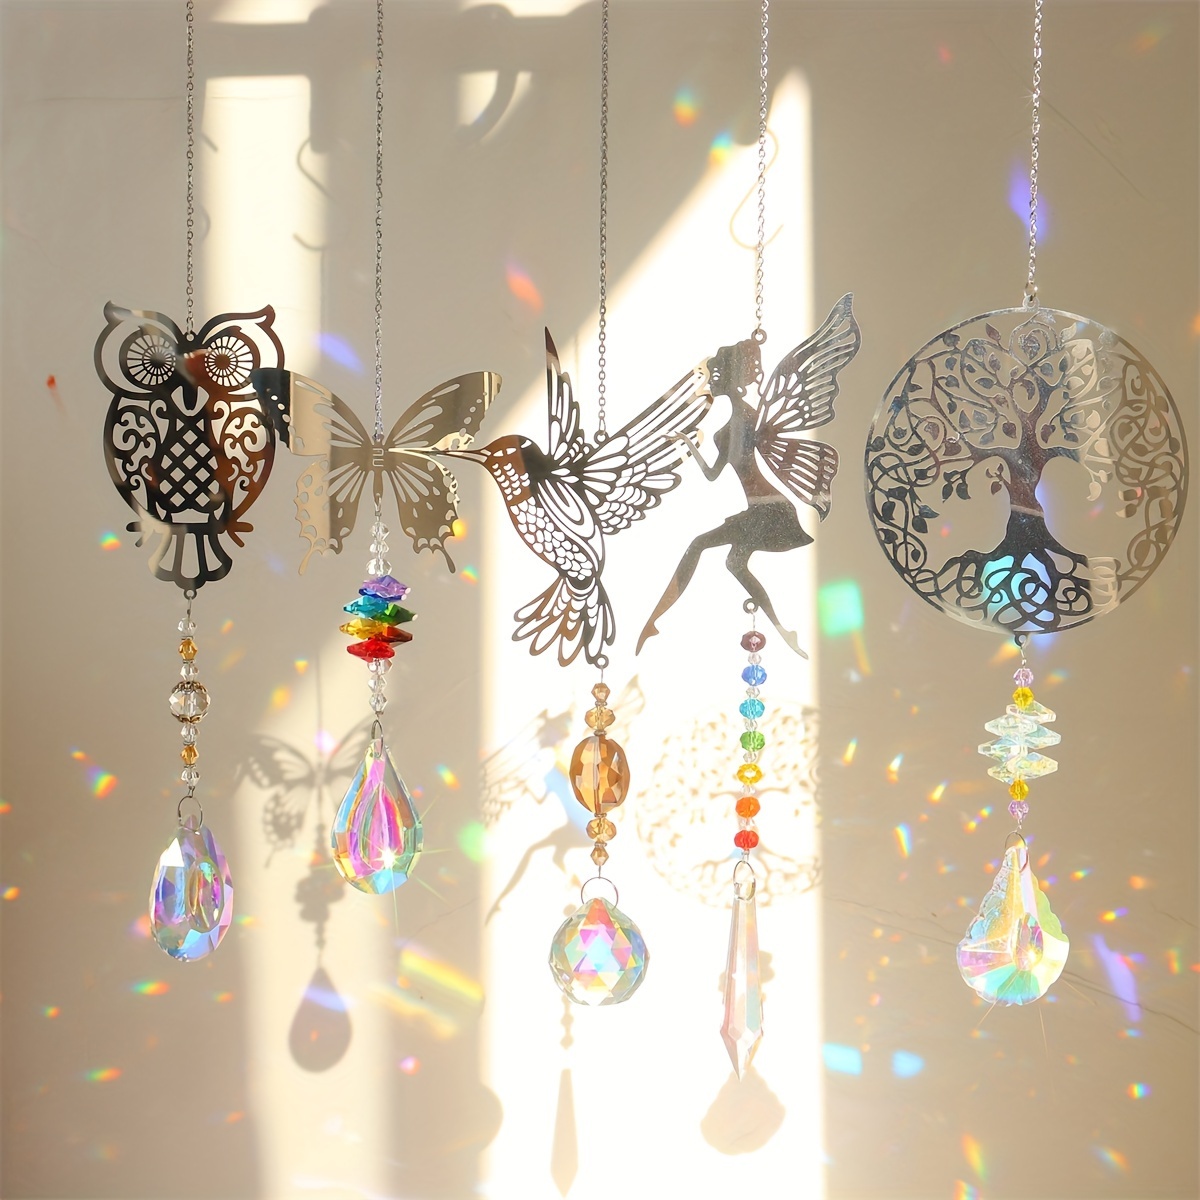 

5-piece Crystal Sun Catcher Set With Prism - Owl, Hummingbird & Butterfly Designs For Window Decor - Glass Rainbow Maker Gift